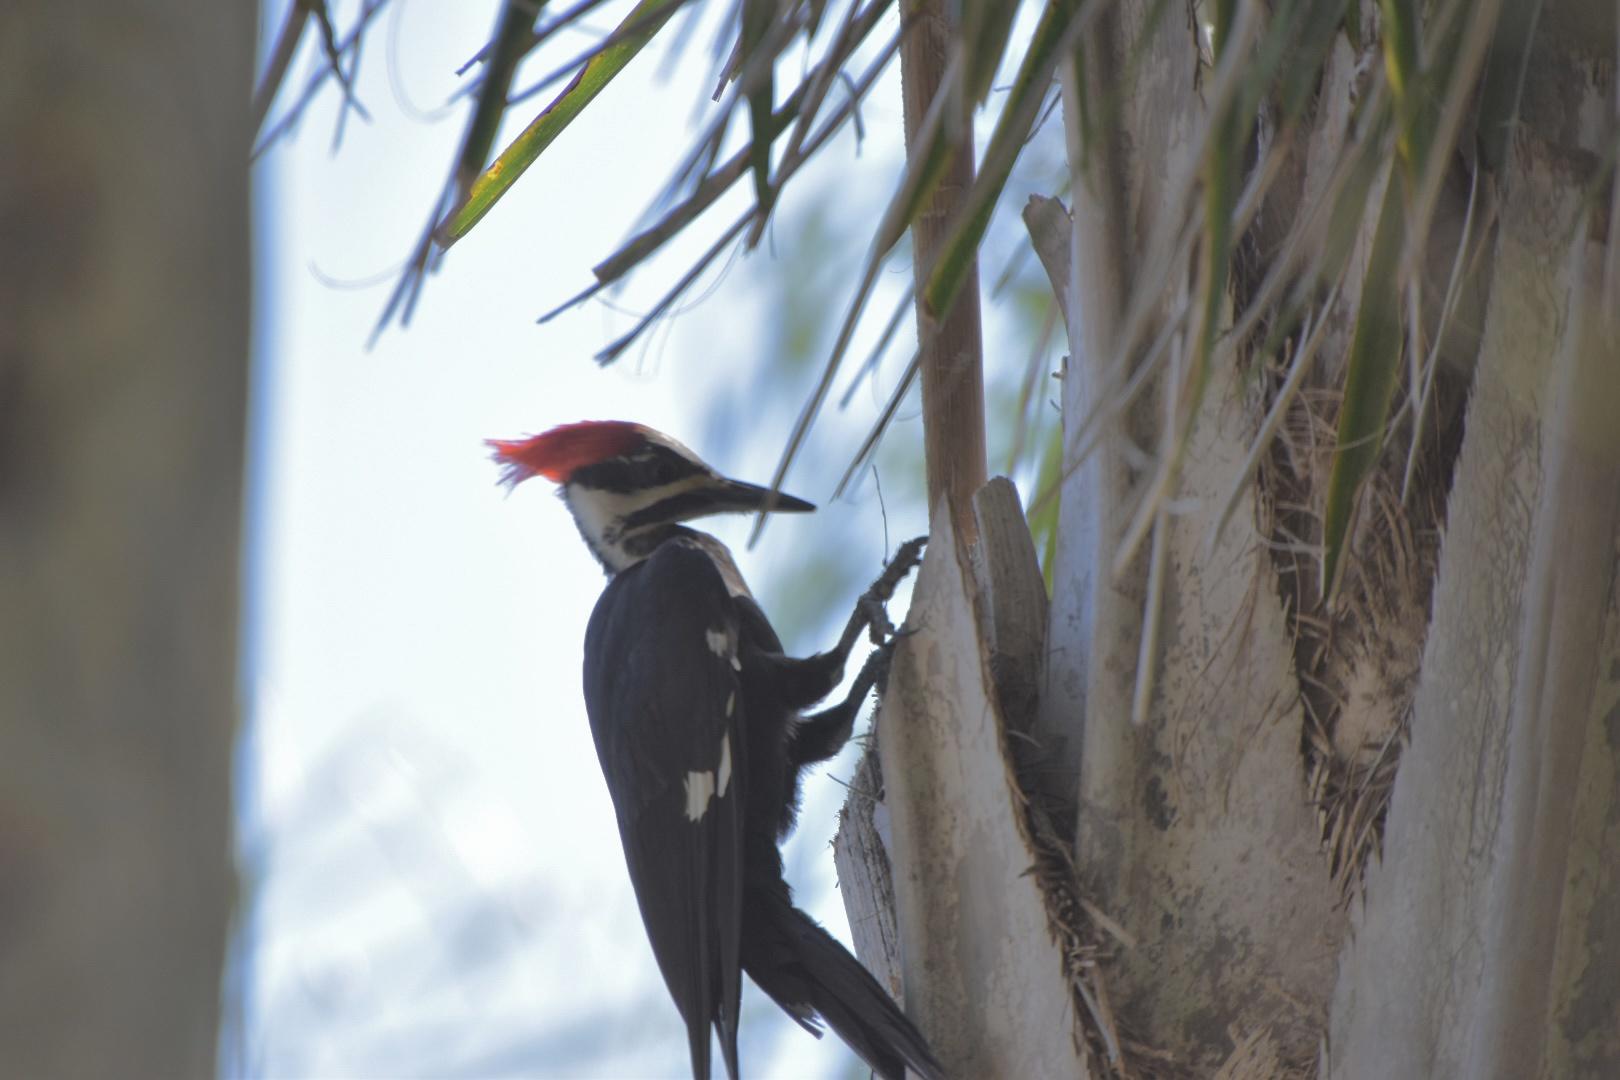 Pileated Woodpecker on the palm tree in my yard.